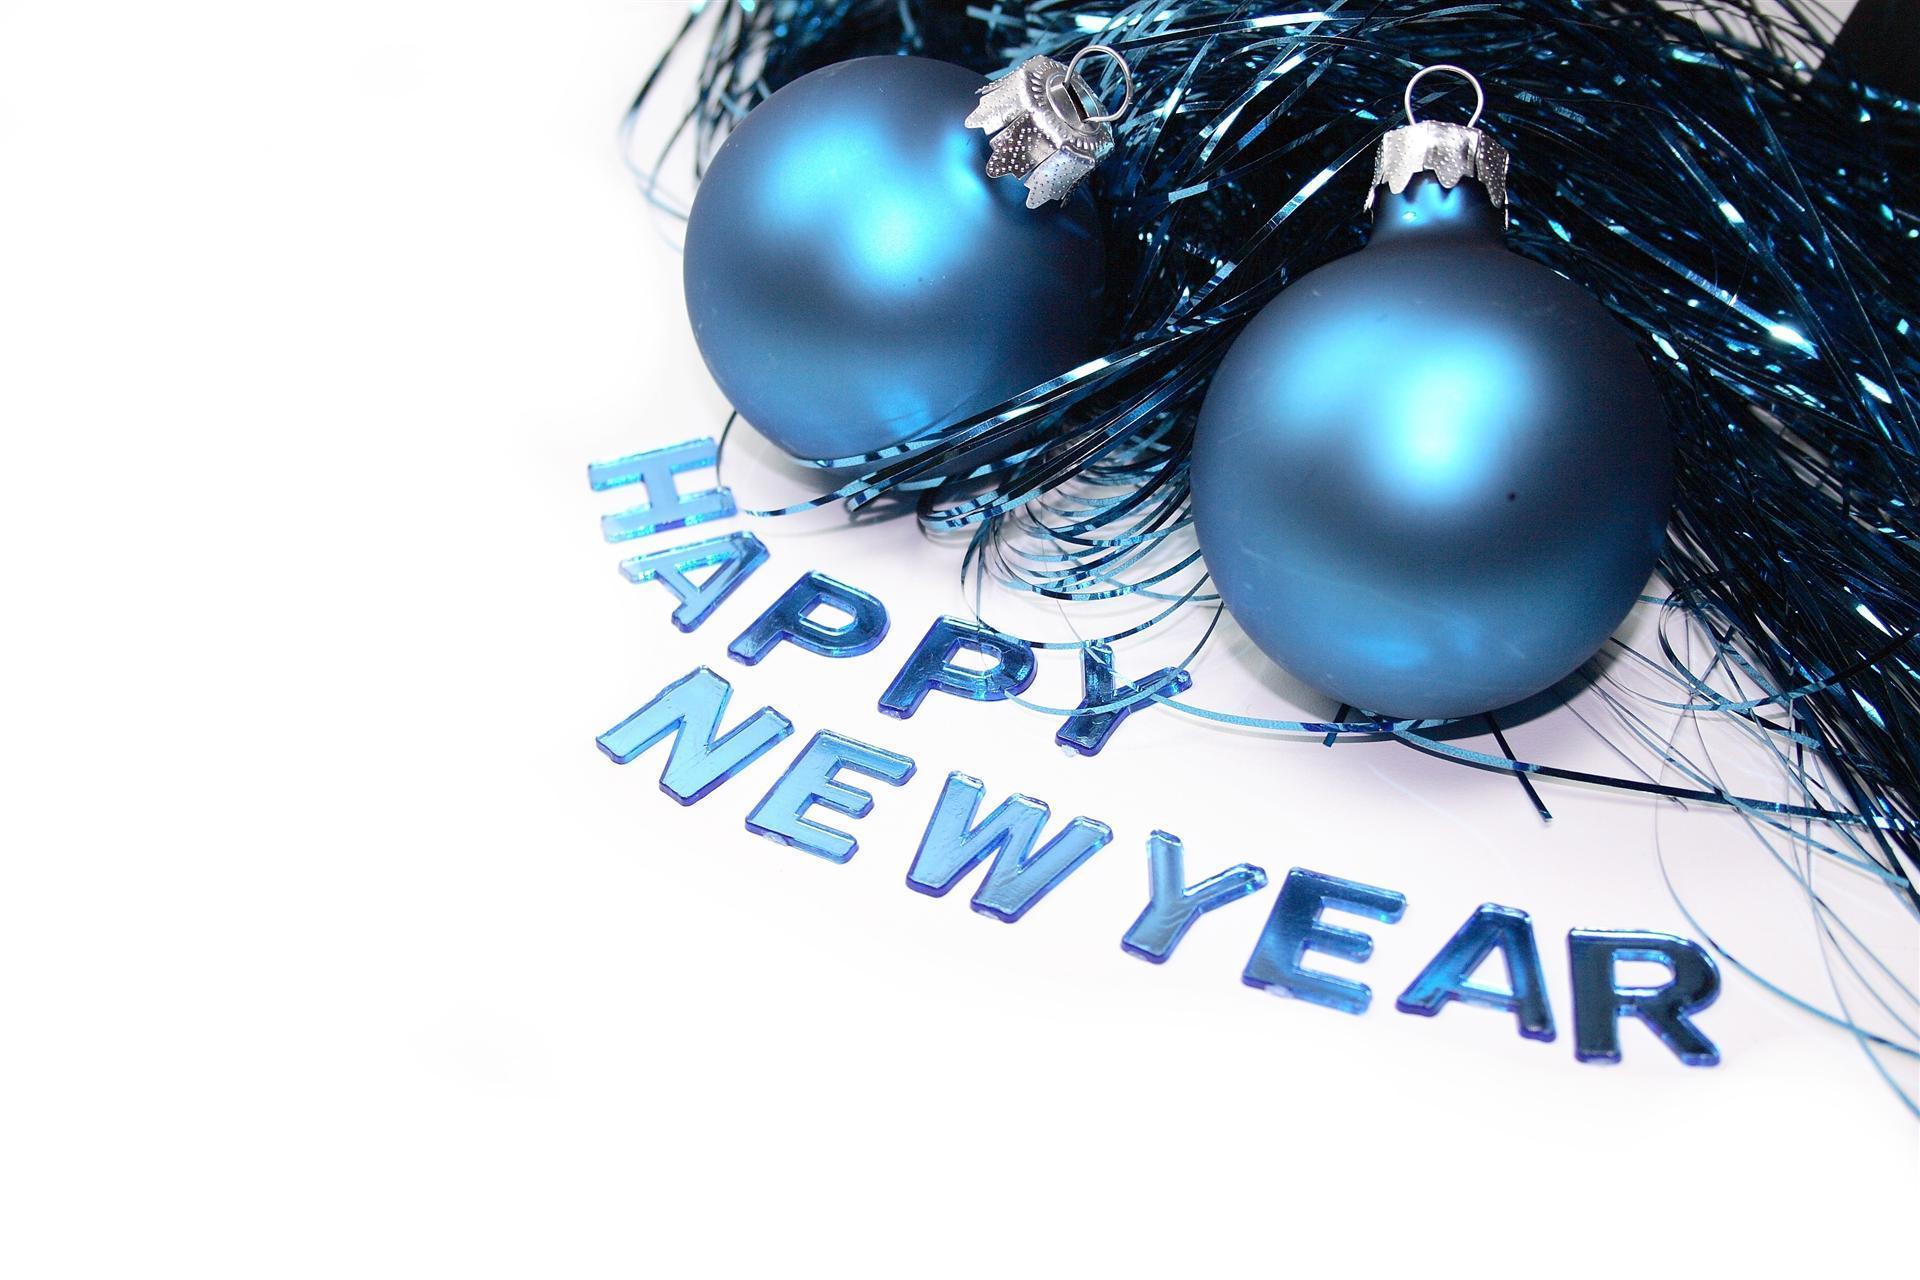 Happy New Year 2013 Wallpaper Free Download 1920×1280